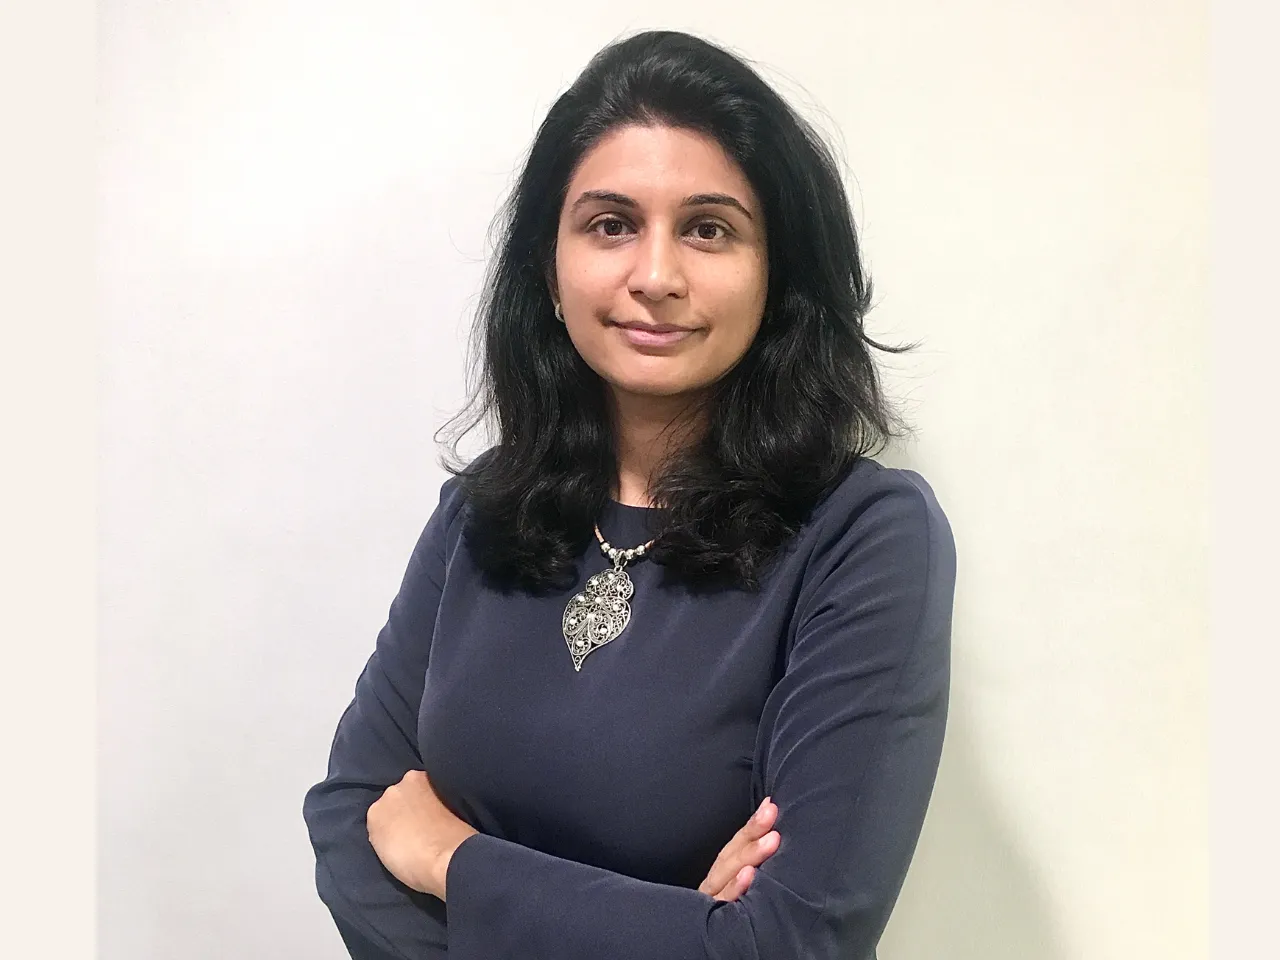 Indian angel investment network Lead Angels appoints Sonia Sahni as its Chief Operating Officer